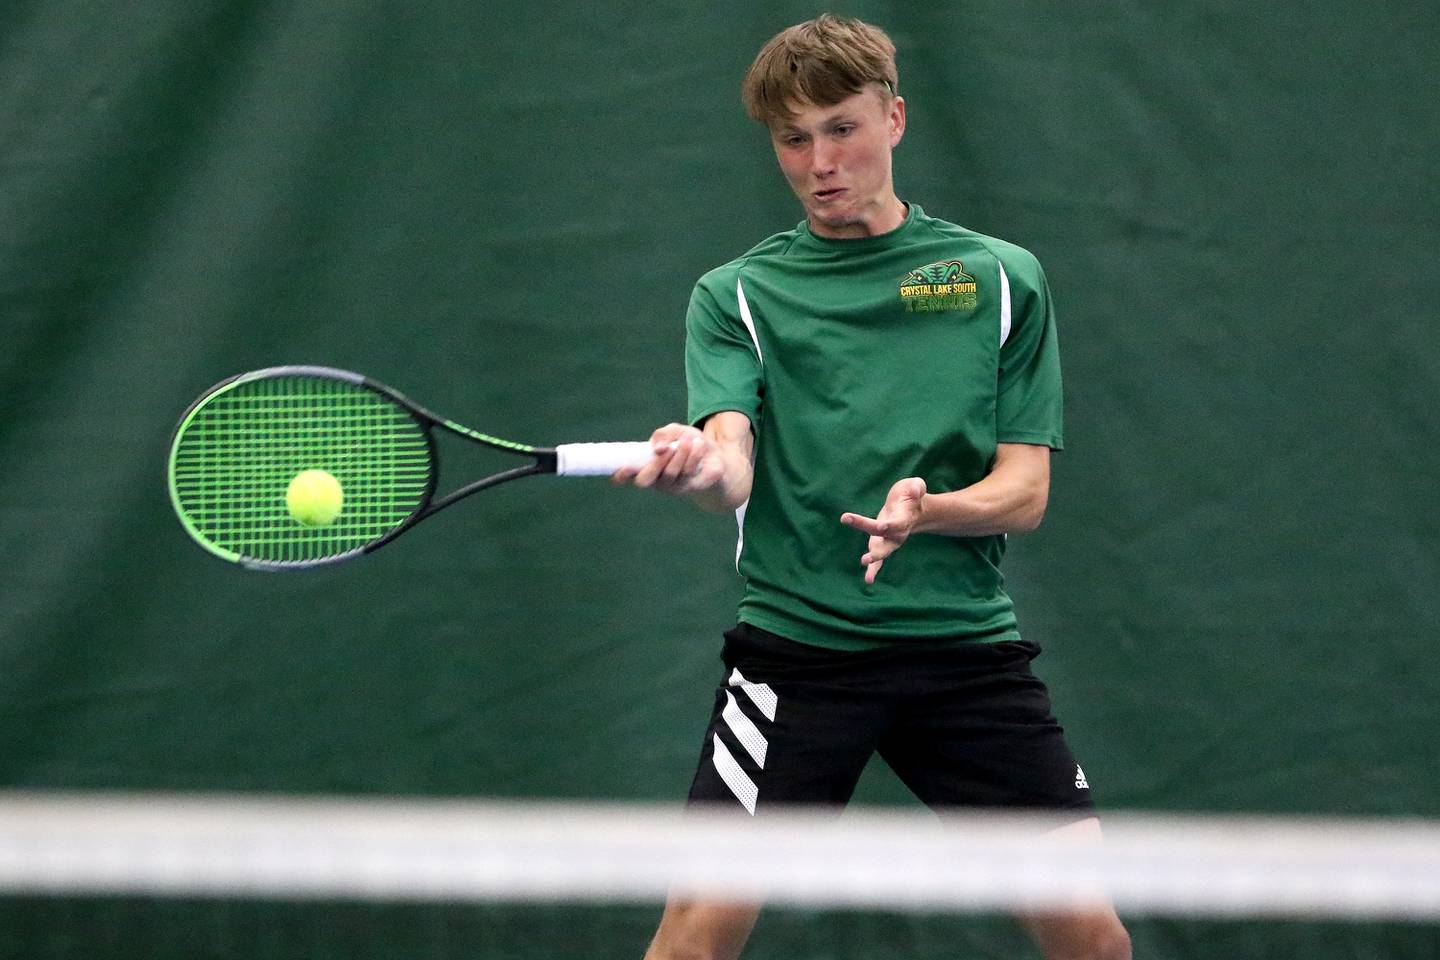 Crystal Lake South's Jackson Schuetzle takes on Jacobs' Thomas Nelson in the final of the Fox Valley Conference Boys' Tennis Tournament at Racket Club on Friday, May 28, 2021 in Crystal Lake.